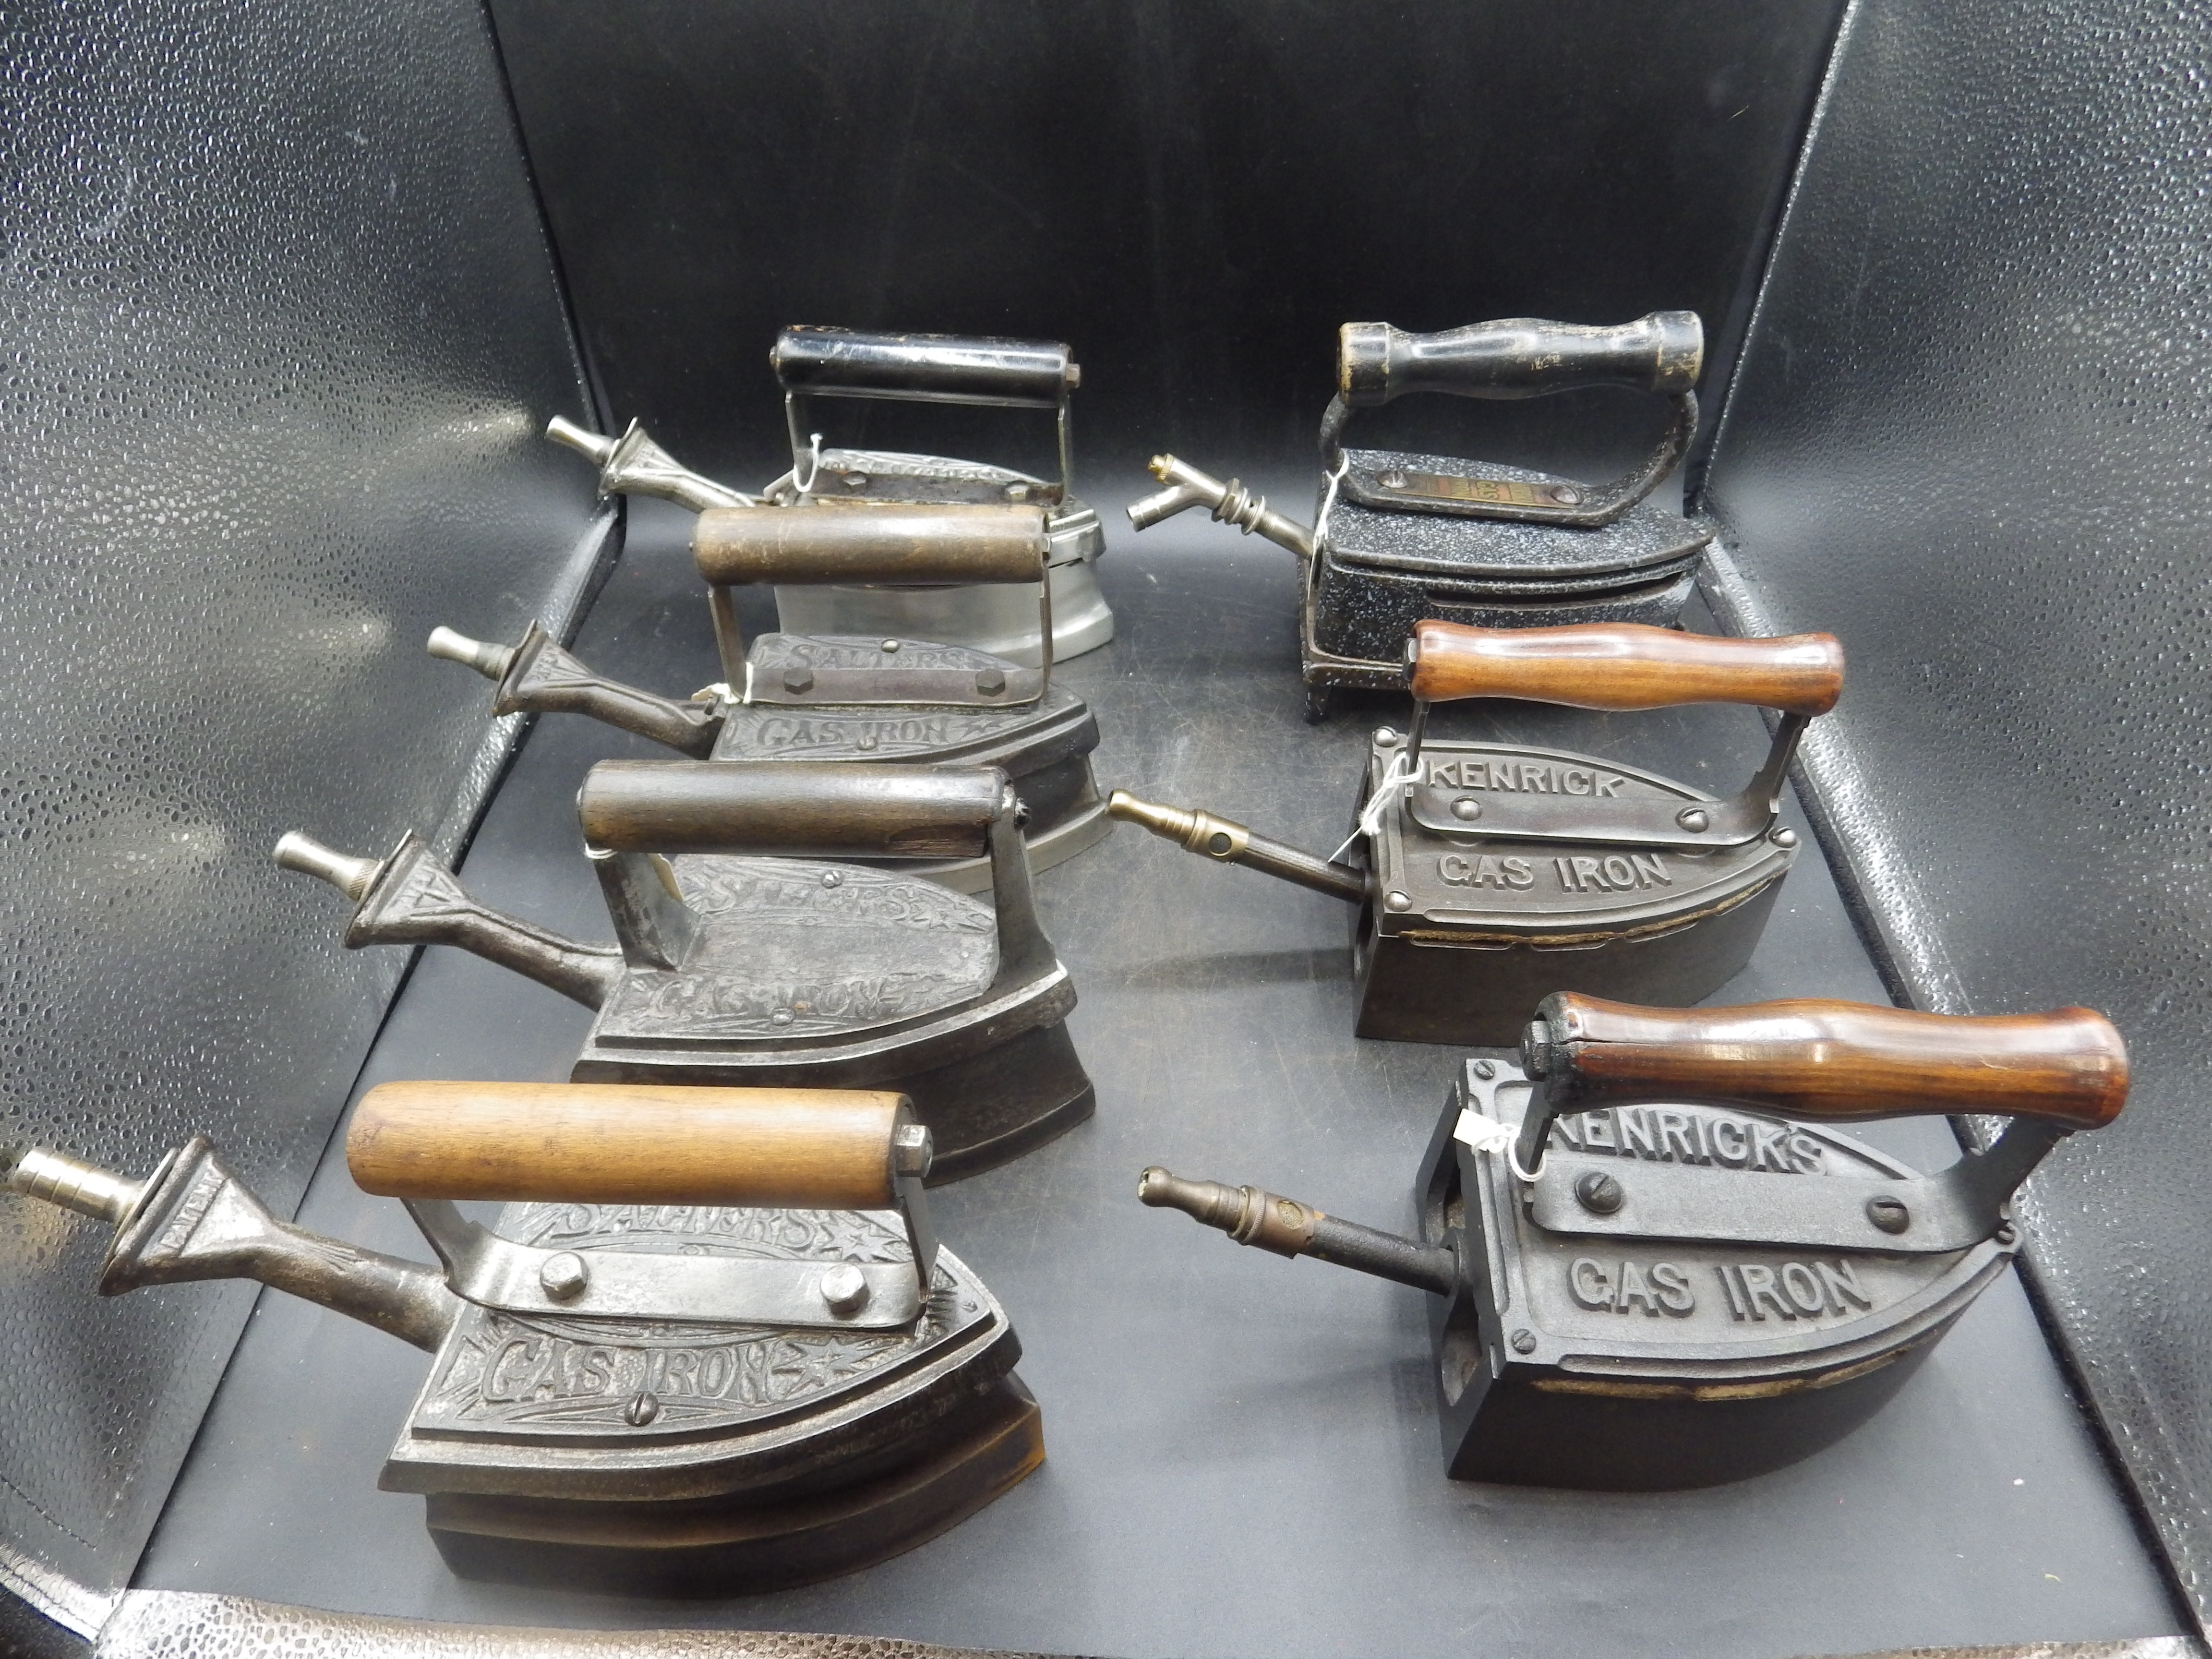 4 Salters gas irons incl no.4 together with 3 A Kendrick & sons gas irons incl Aurora enamel model